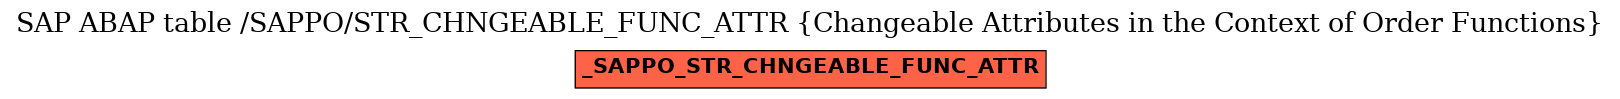 E-R Diagram for table /SAPPO/STR_CHNGEABLE_FUNC_ATTR (Changeable Attributes in the Context of Order Functions)